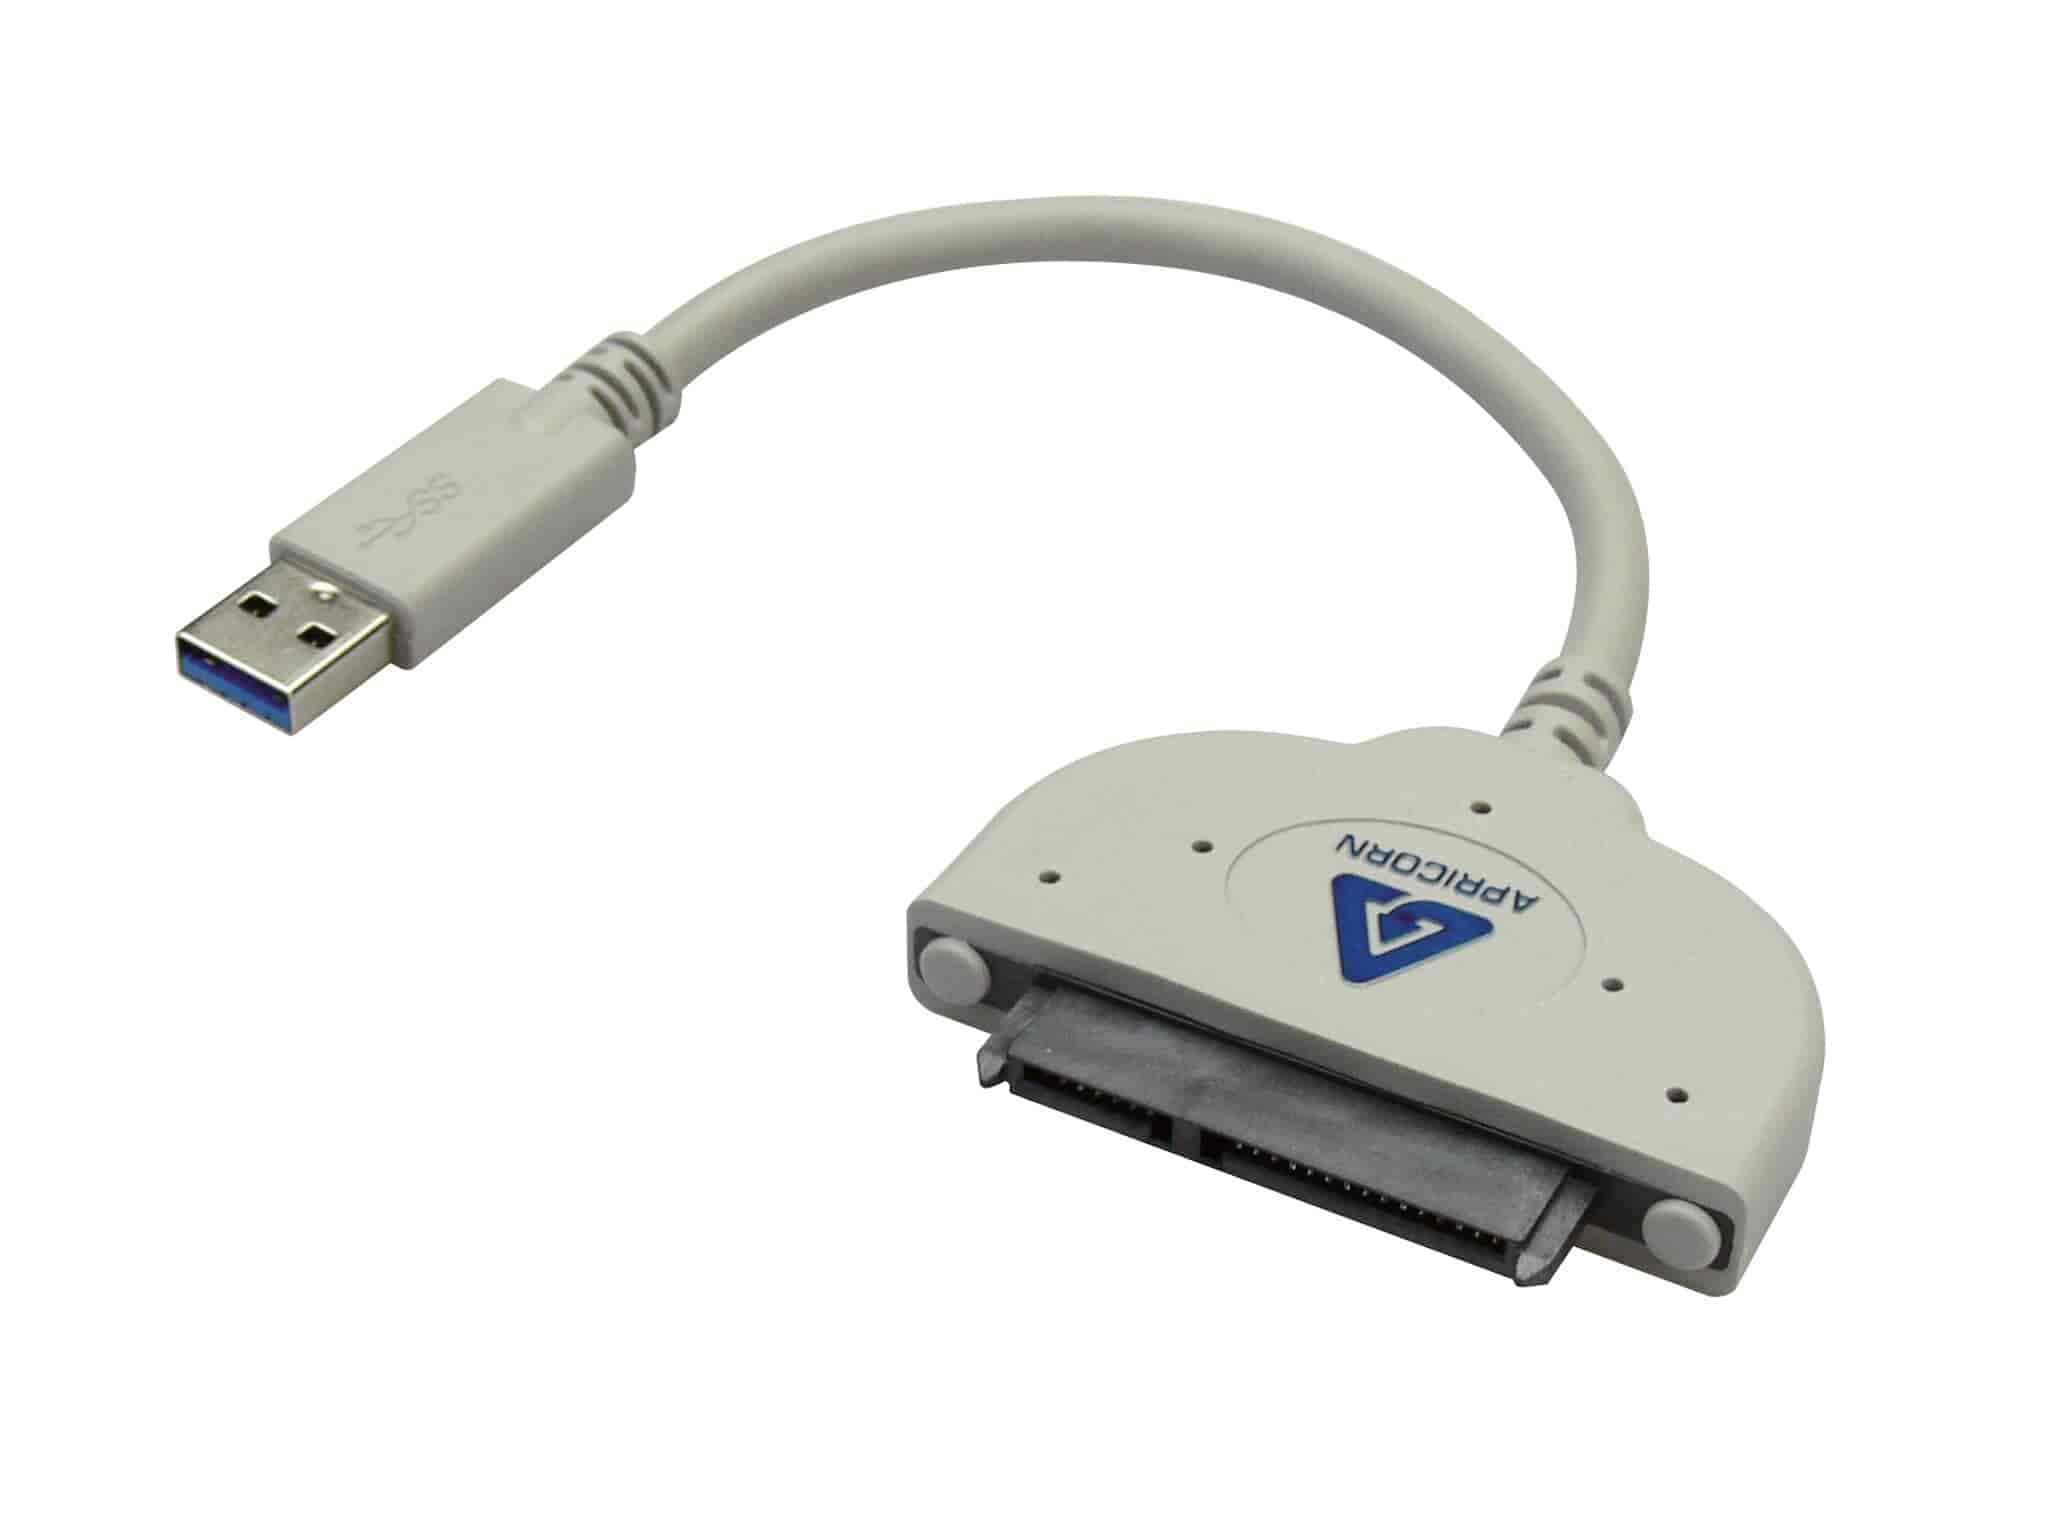 Sandberg USB 3.0 Hard Disk Clone CableProviding a super fast USB 3.0 connection to any 2.5” SATA notebook hard drive or SSD (solid state drive), Sandberg USB 3.0 Hard Disk Clone Cable is the easiest way to upgrade your notebook drive. Packaged with user-friendly Cloning Software from American brand Apricorn and using an ultra-fast USB 3.0 connection for up to 10x faster data transfer rates than USB 2.0, you can clone your notebook drive in a snap.Sandberg